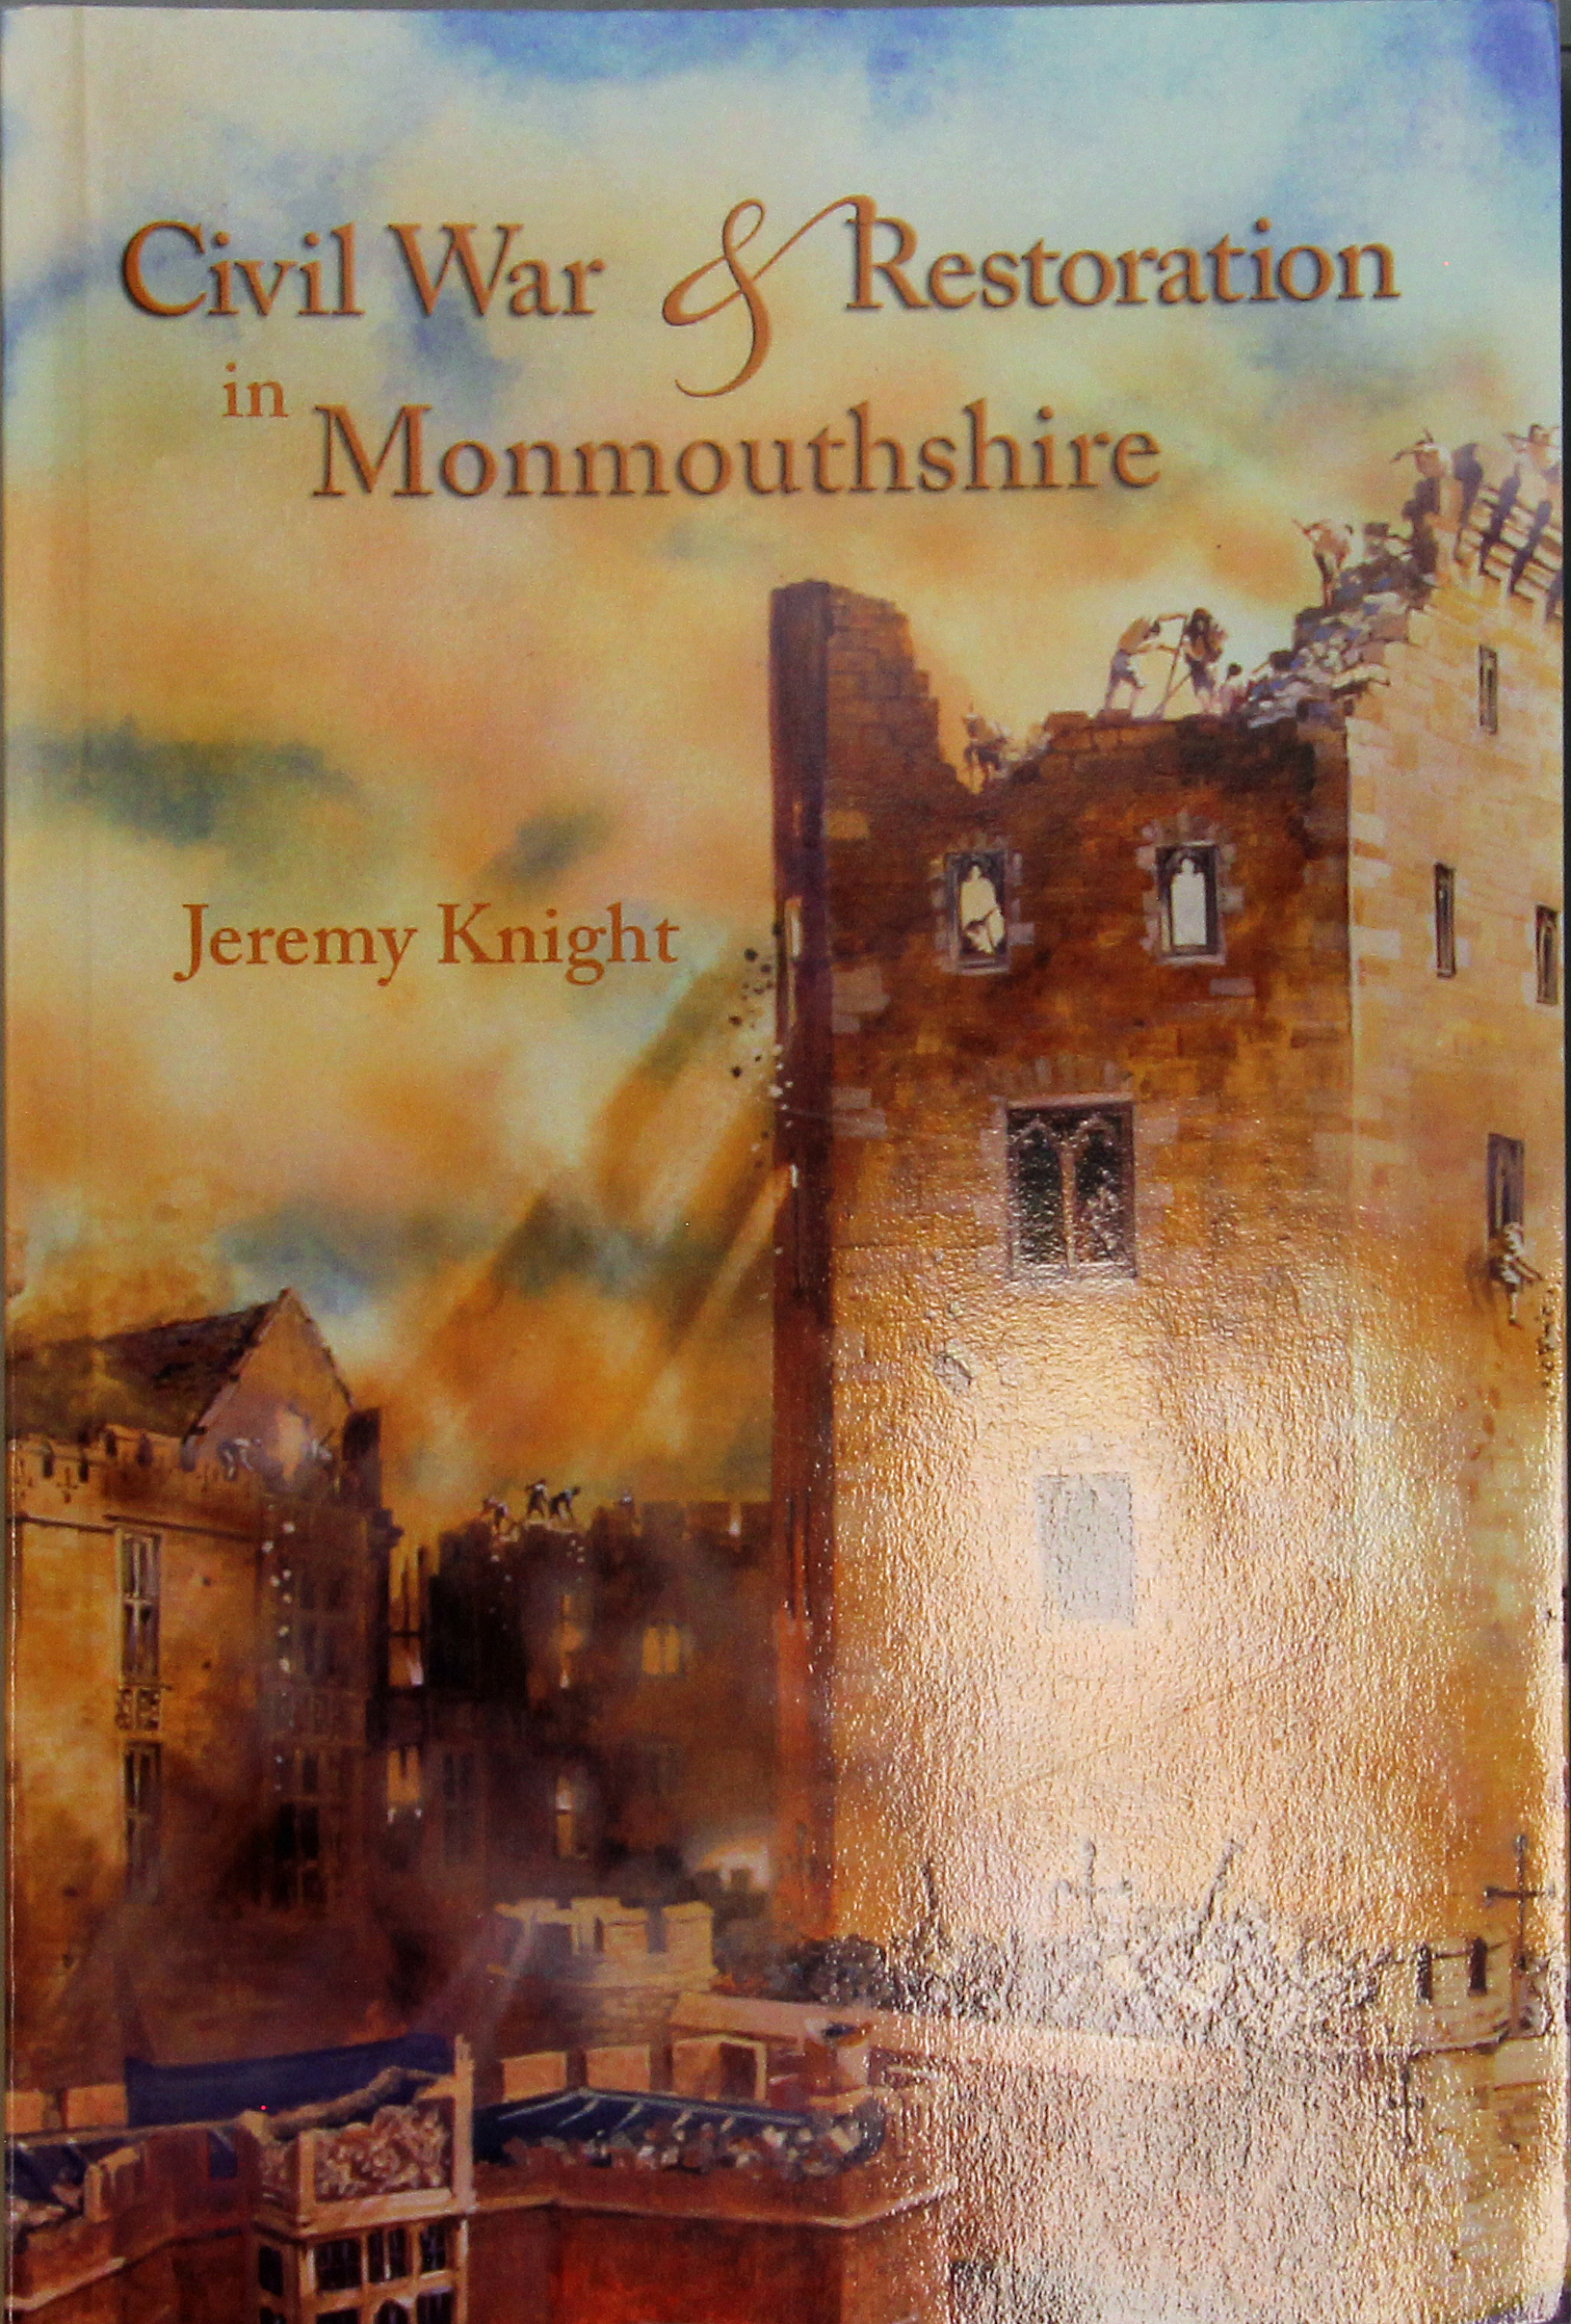 Civil War and Restoration in Monmouthshire, Jeremy Knight, 2005, £12.95